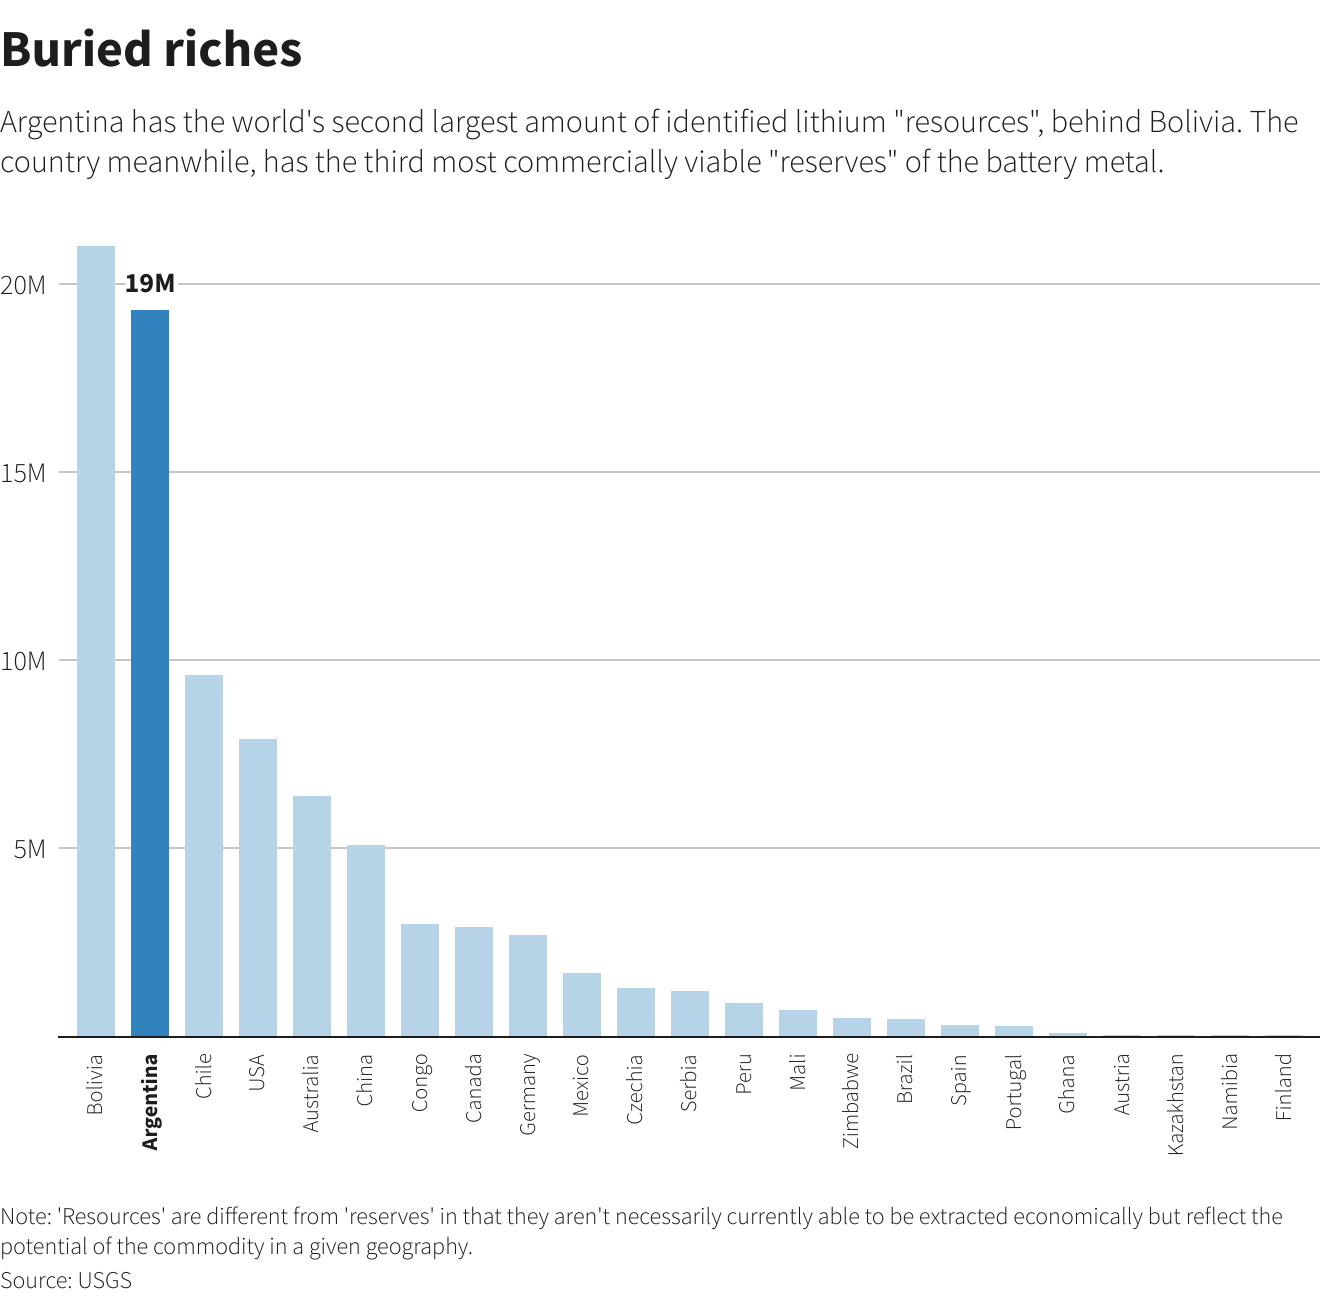 Buried riches